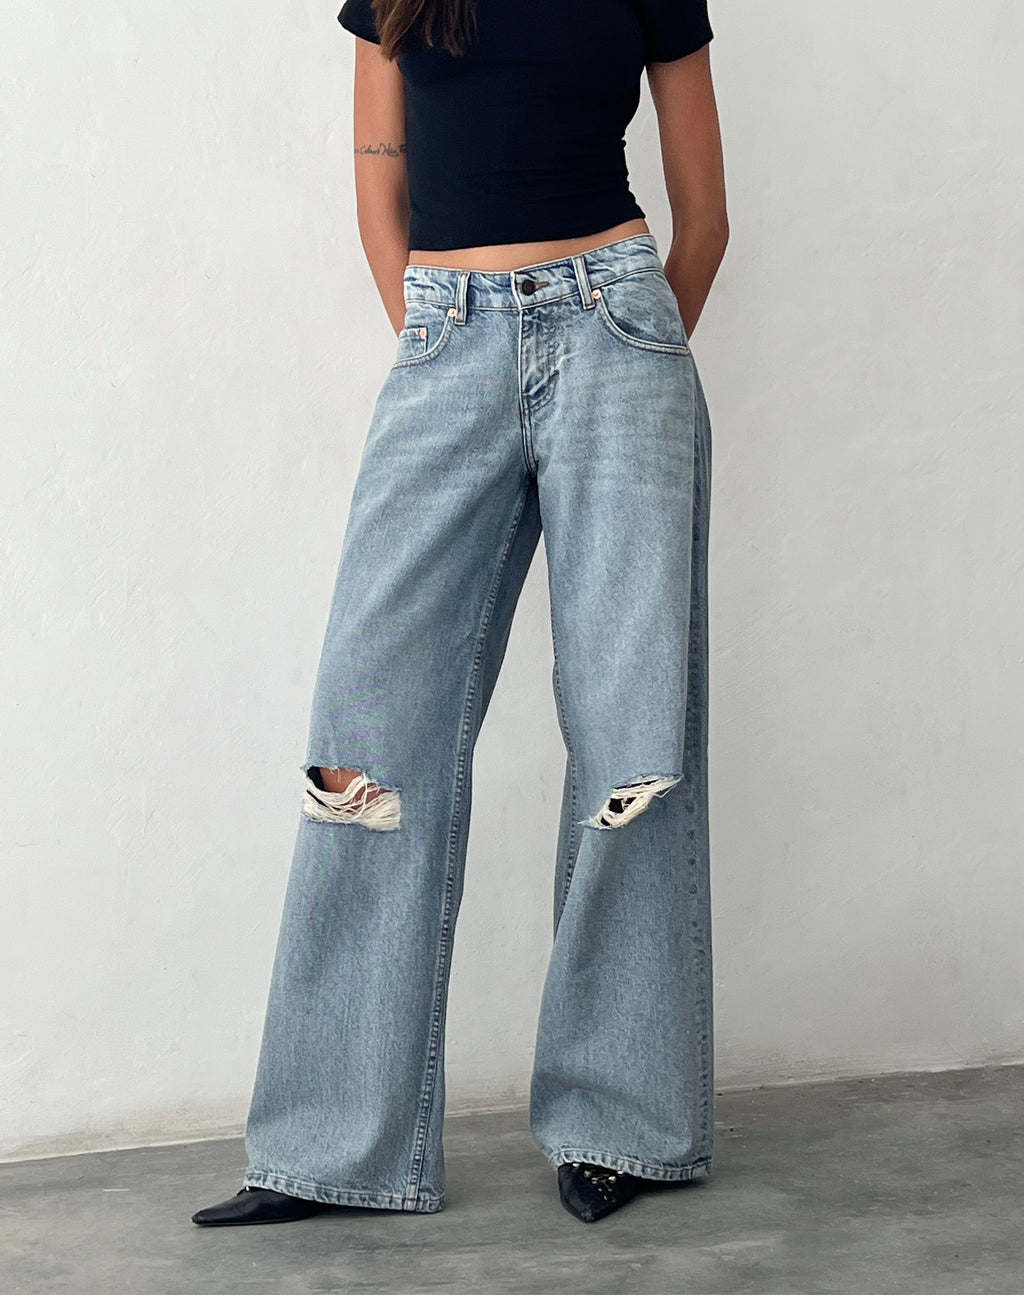 Ripped Roomy Extra Wide Low Rise Jean in Vintage Blue Wash